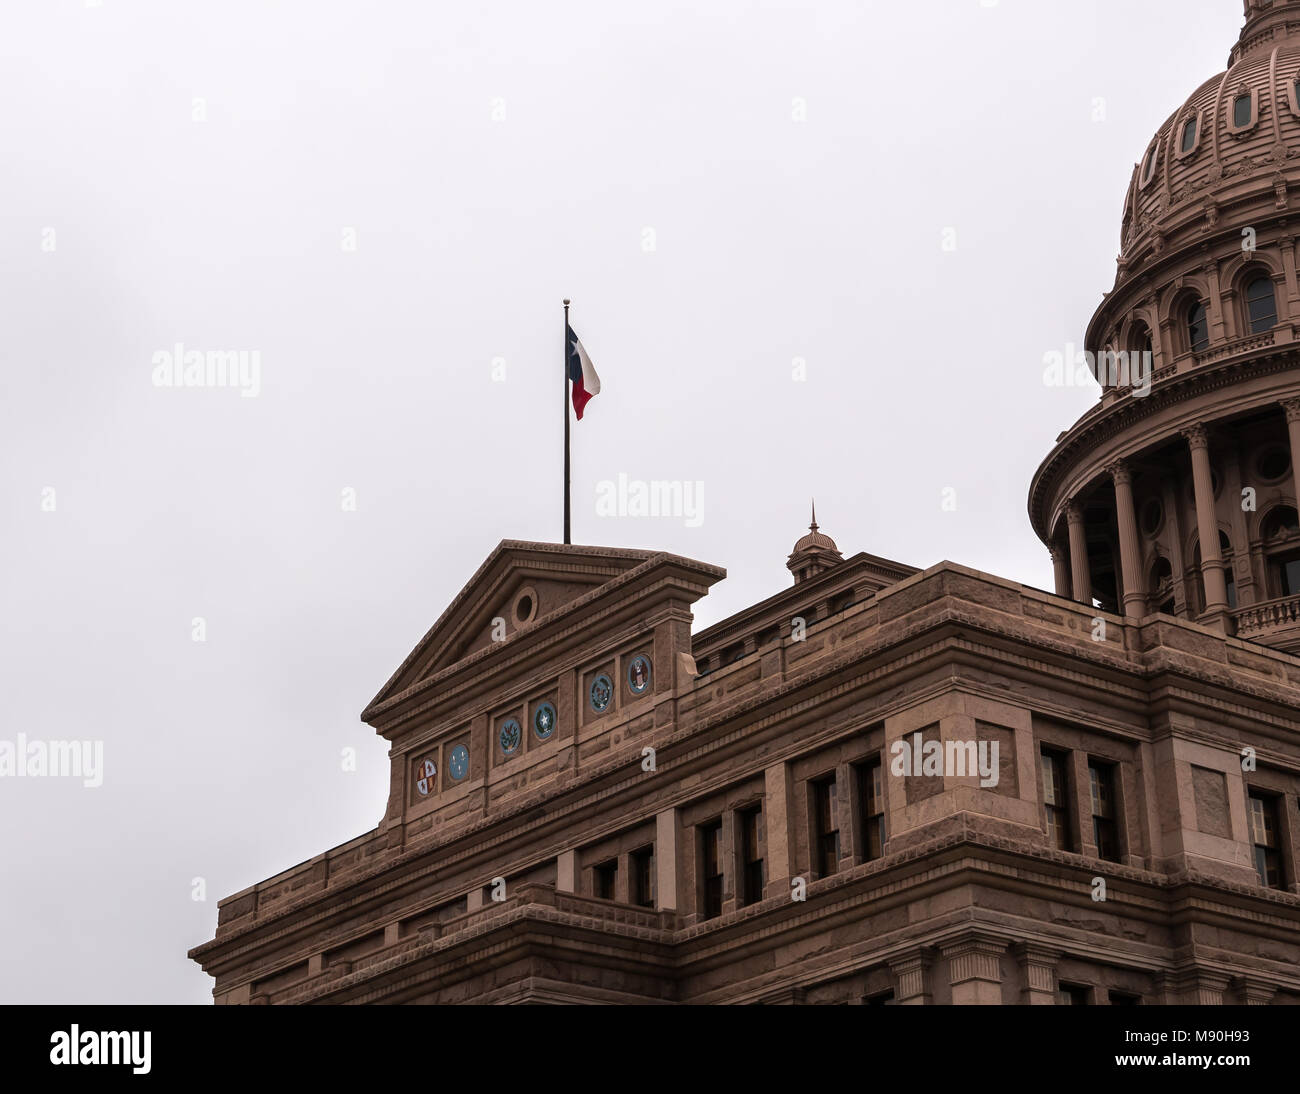 AUSTIN, TEXAS - DECEMBER 31, 2017: The iconic Lone Star state flag positioned on top of the front of the state Capitol building. Stock Photo